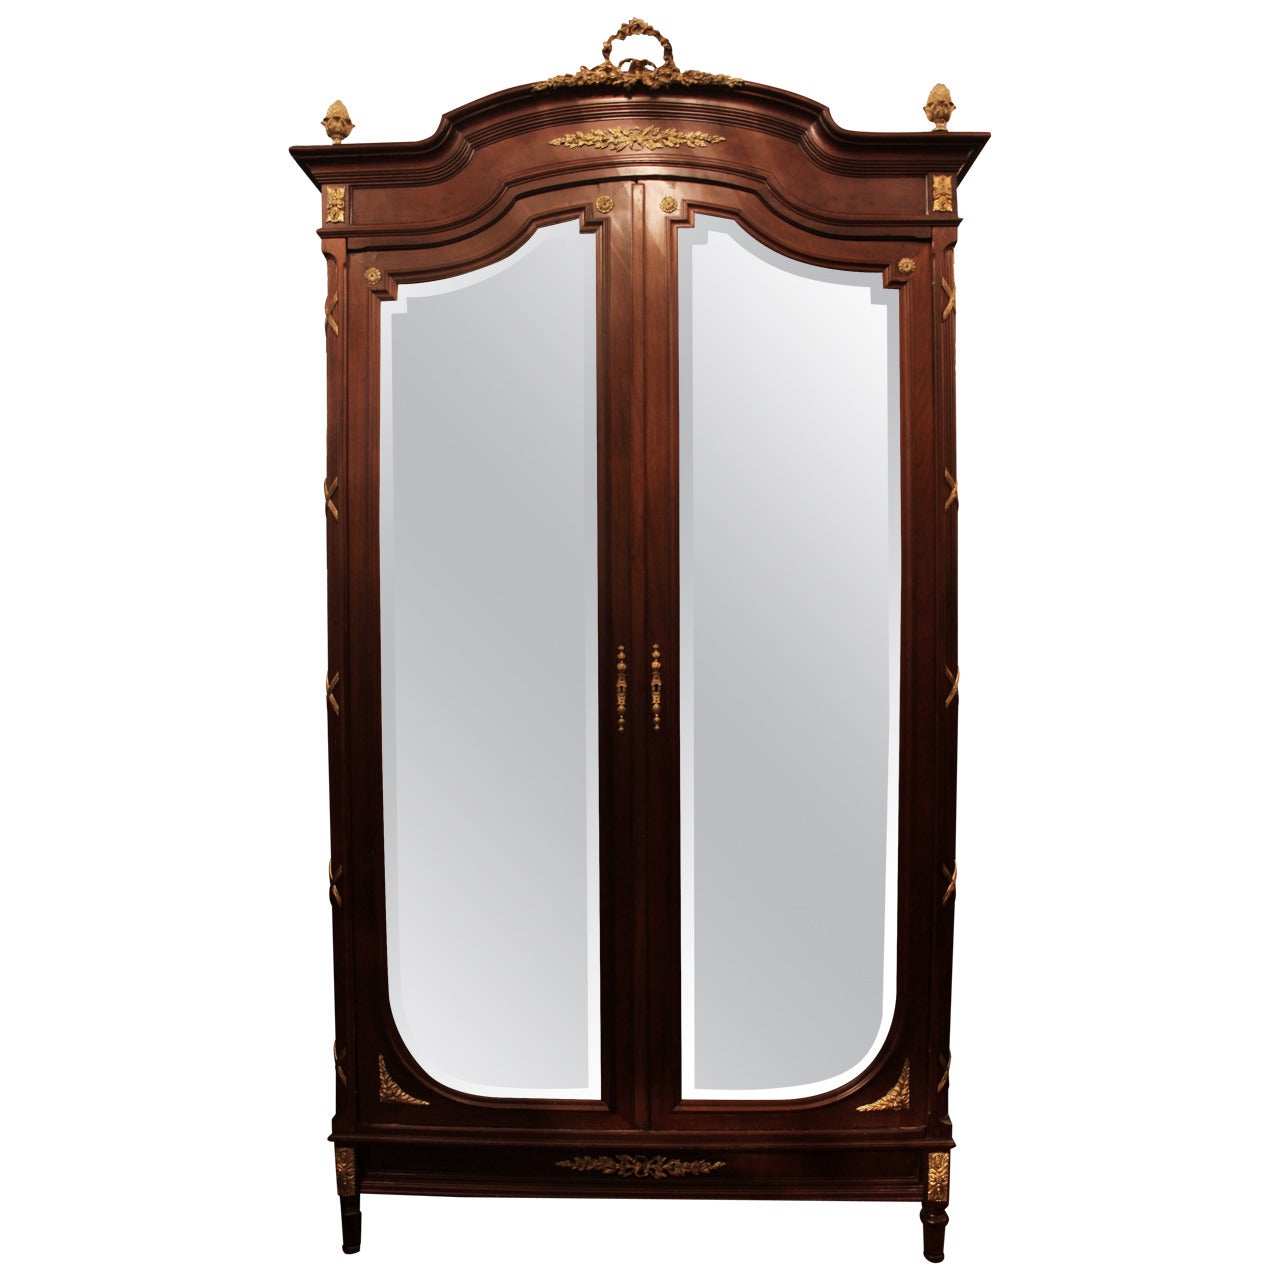 1890s French Empire Mahogany and Gilded Bronze Armoire with Mirrored Doors